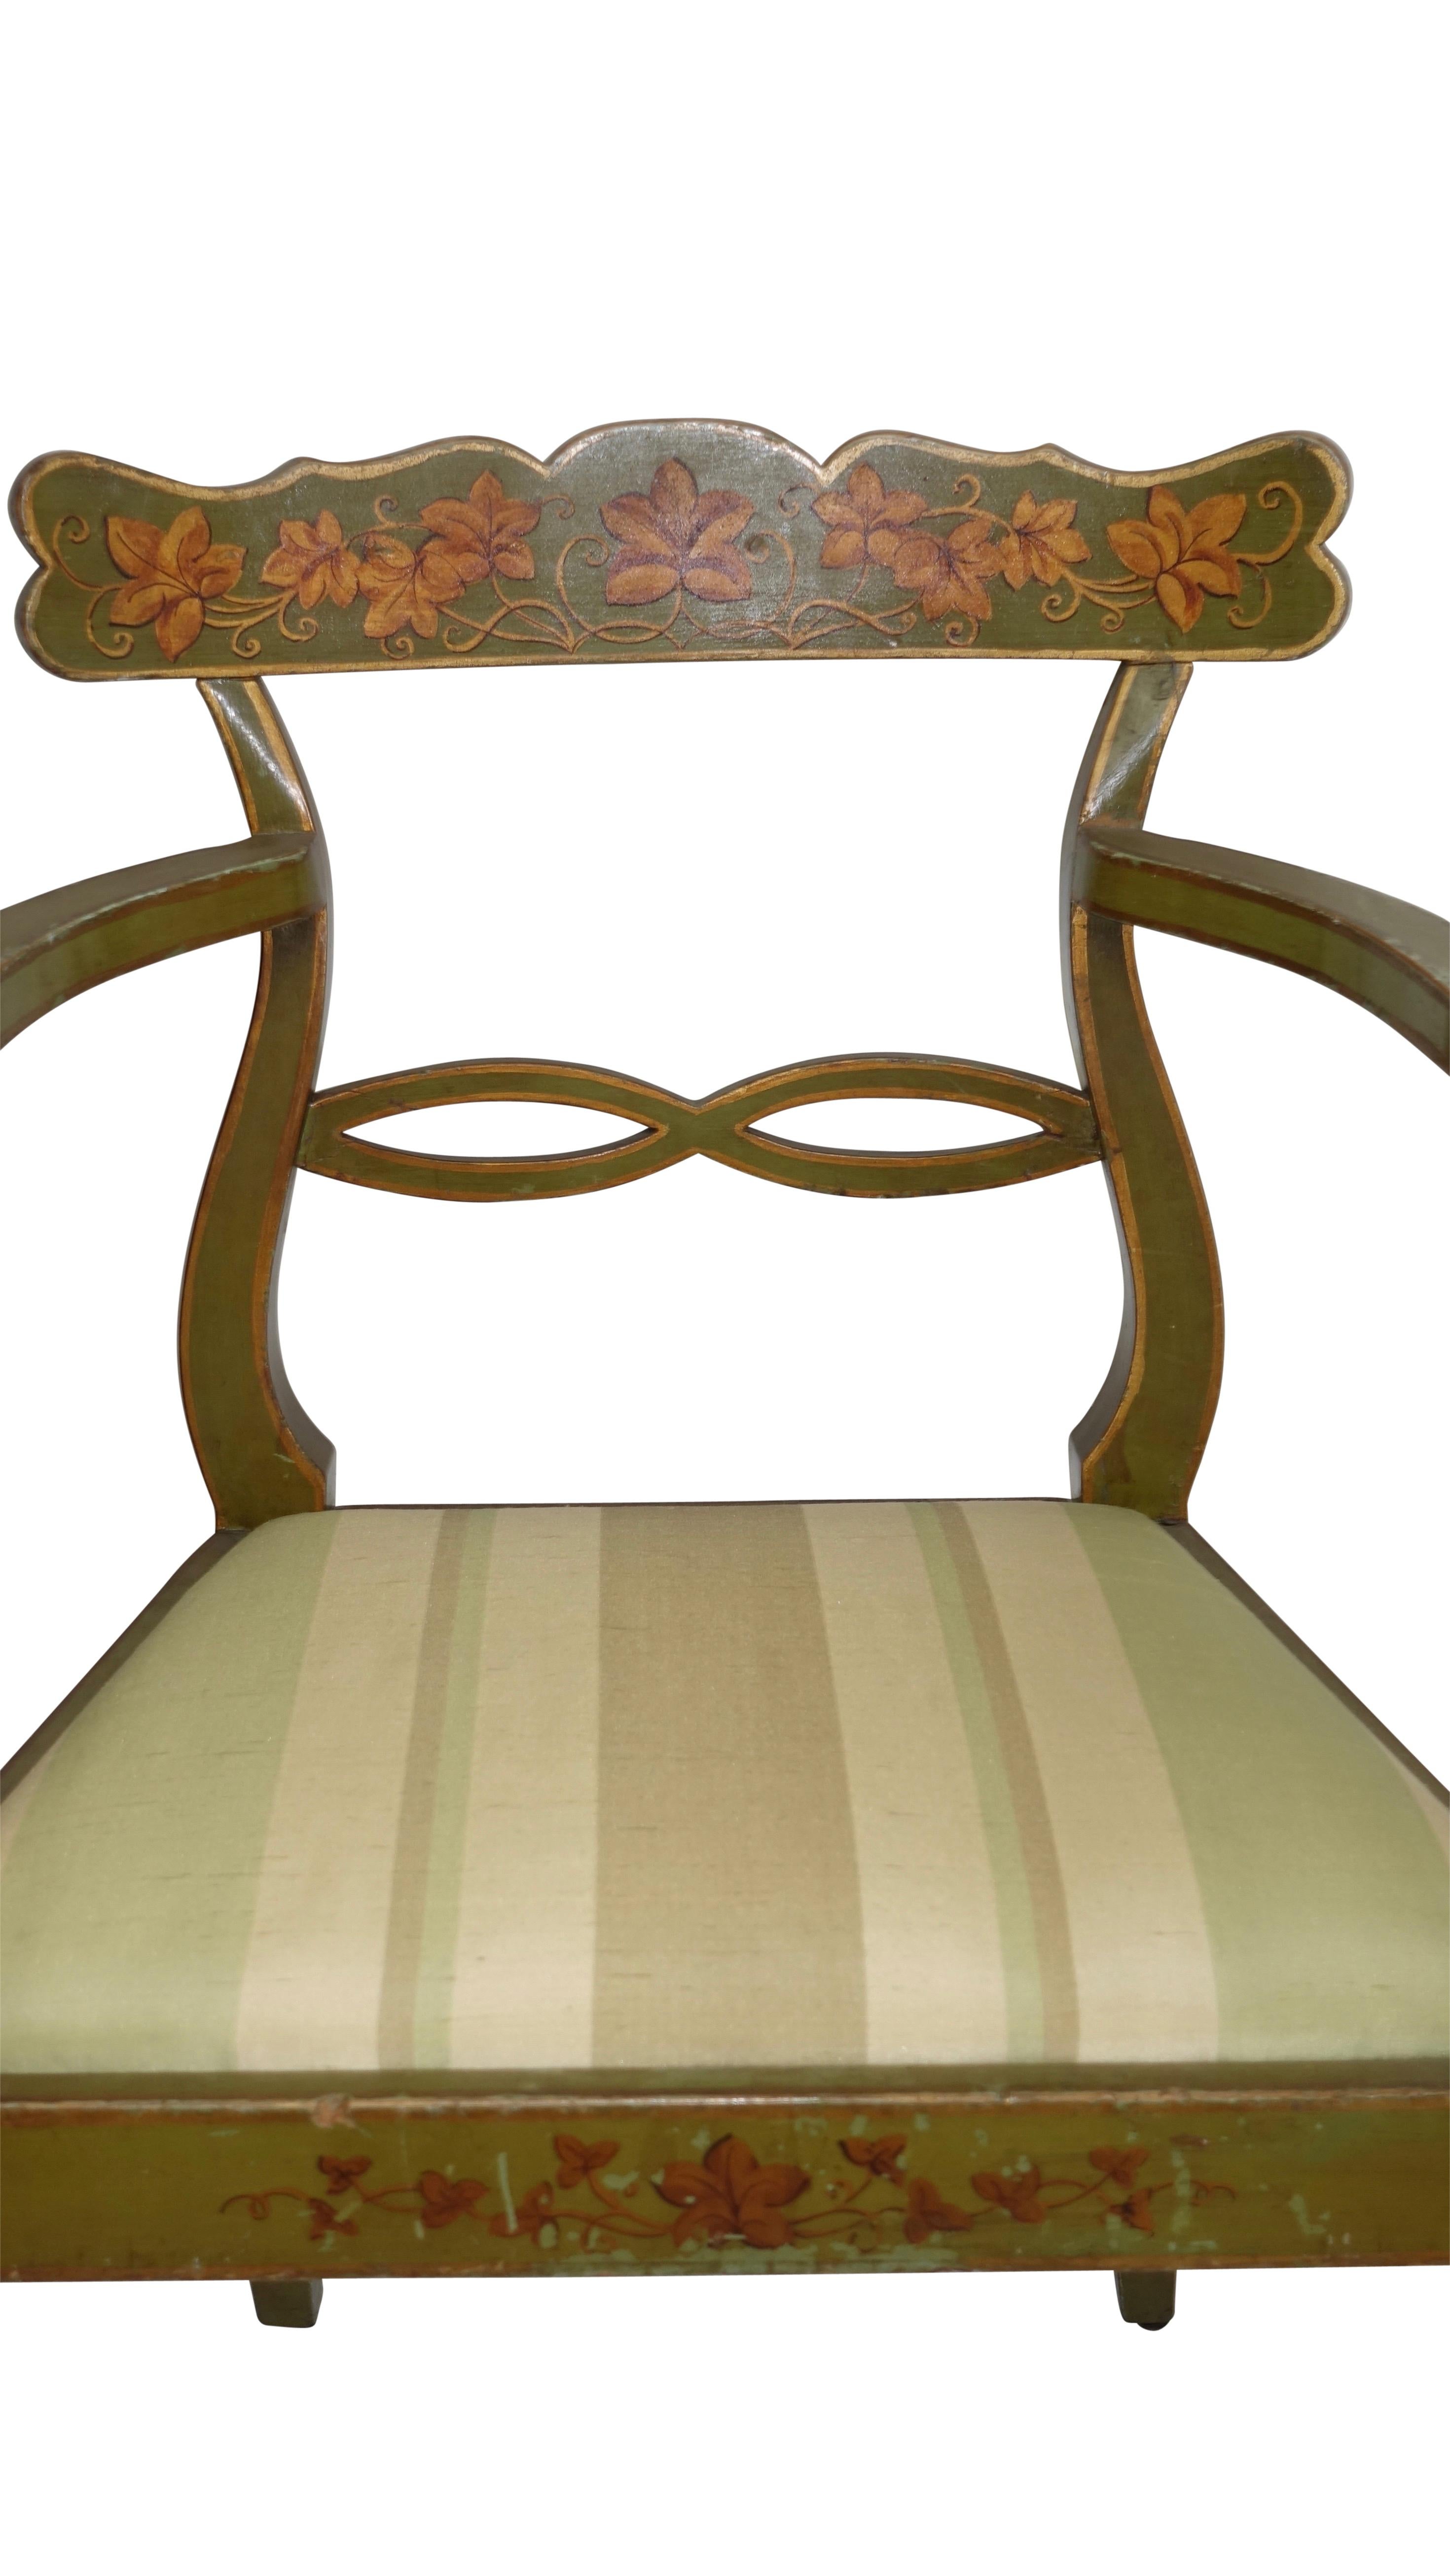 Four Green Painted Armchairs with Trailing Ivy, Northern European, 19th Century For Sale 4